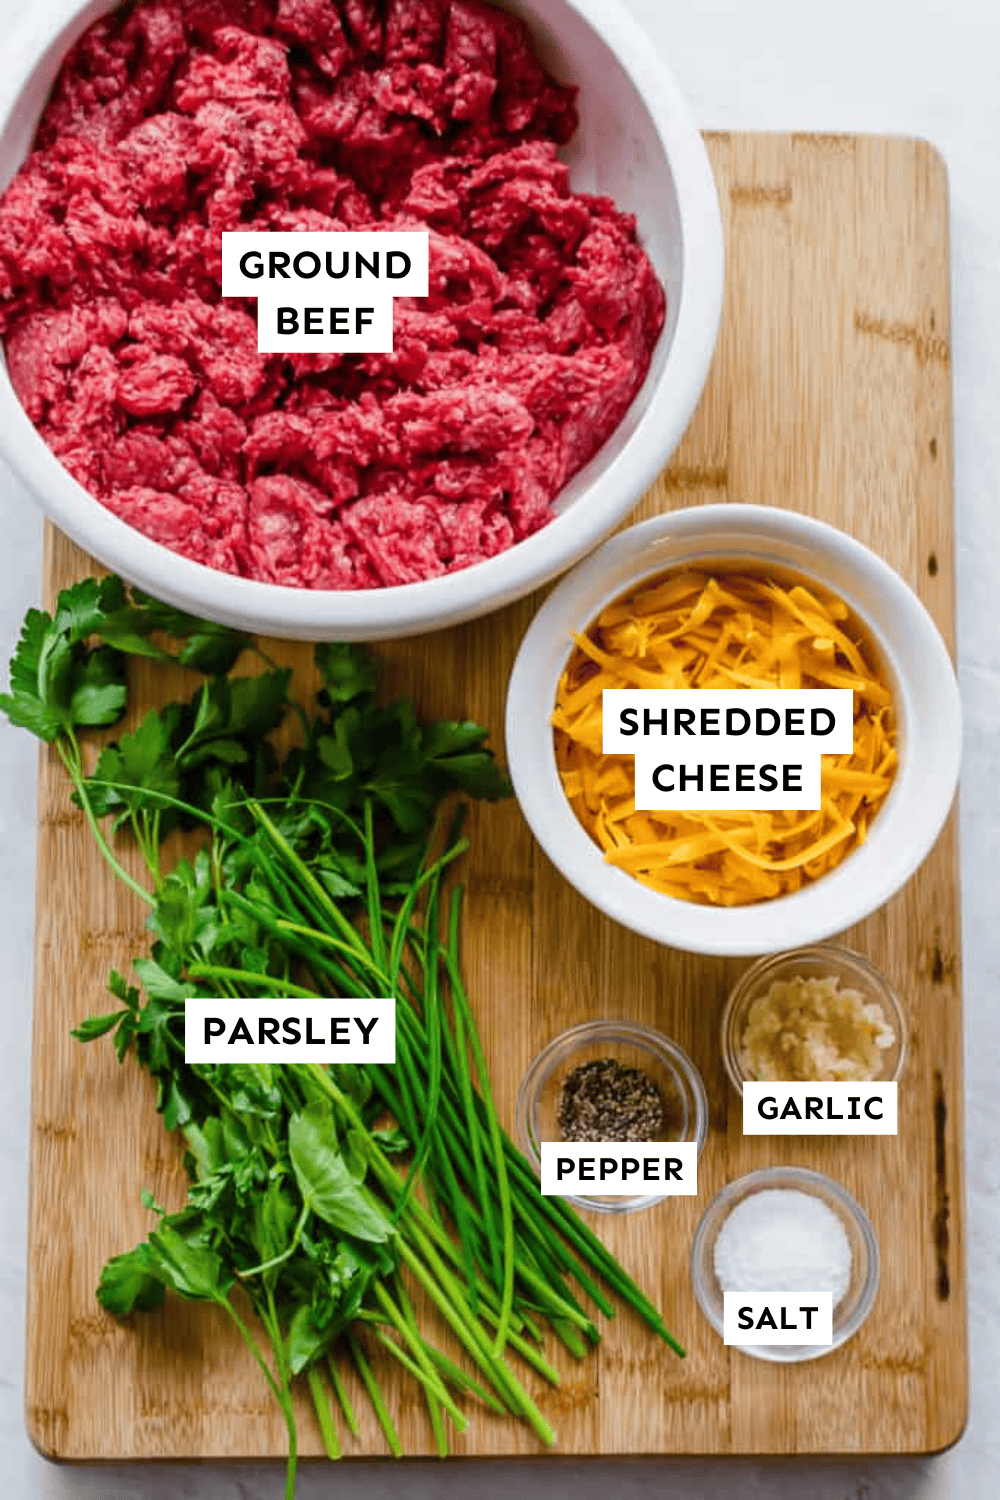 Cheesy chive burger ingredients measured out and labeled.